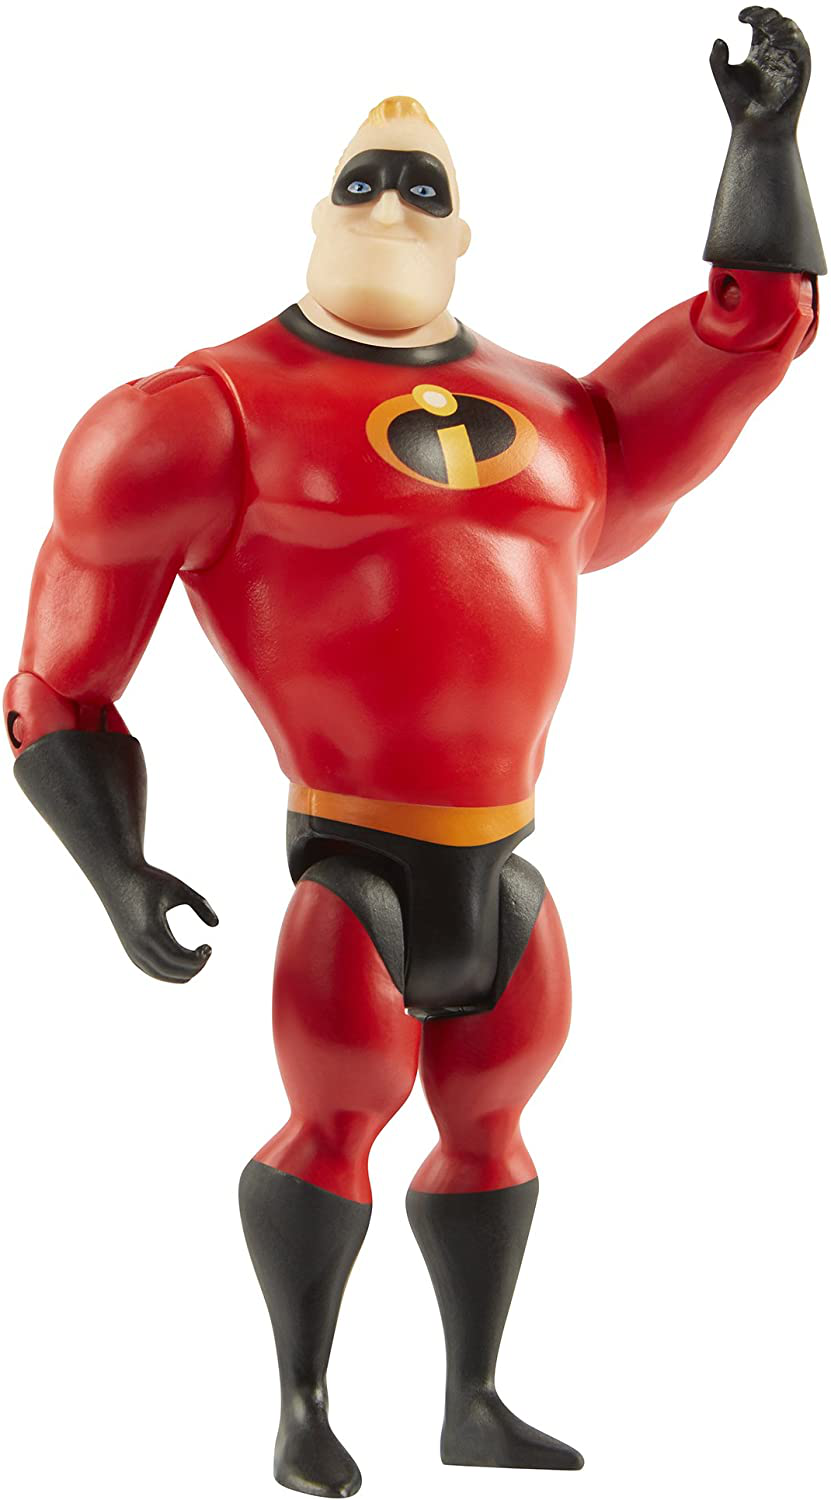 The Incredibles 2 Mr. Incredible 4-Inch Action Figure